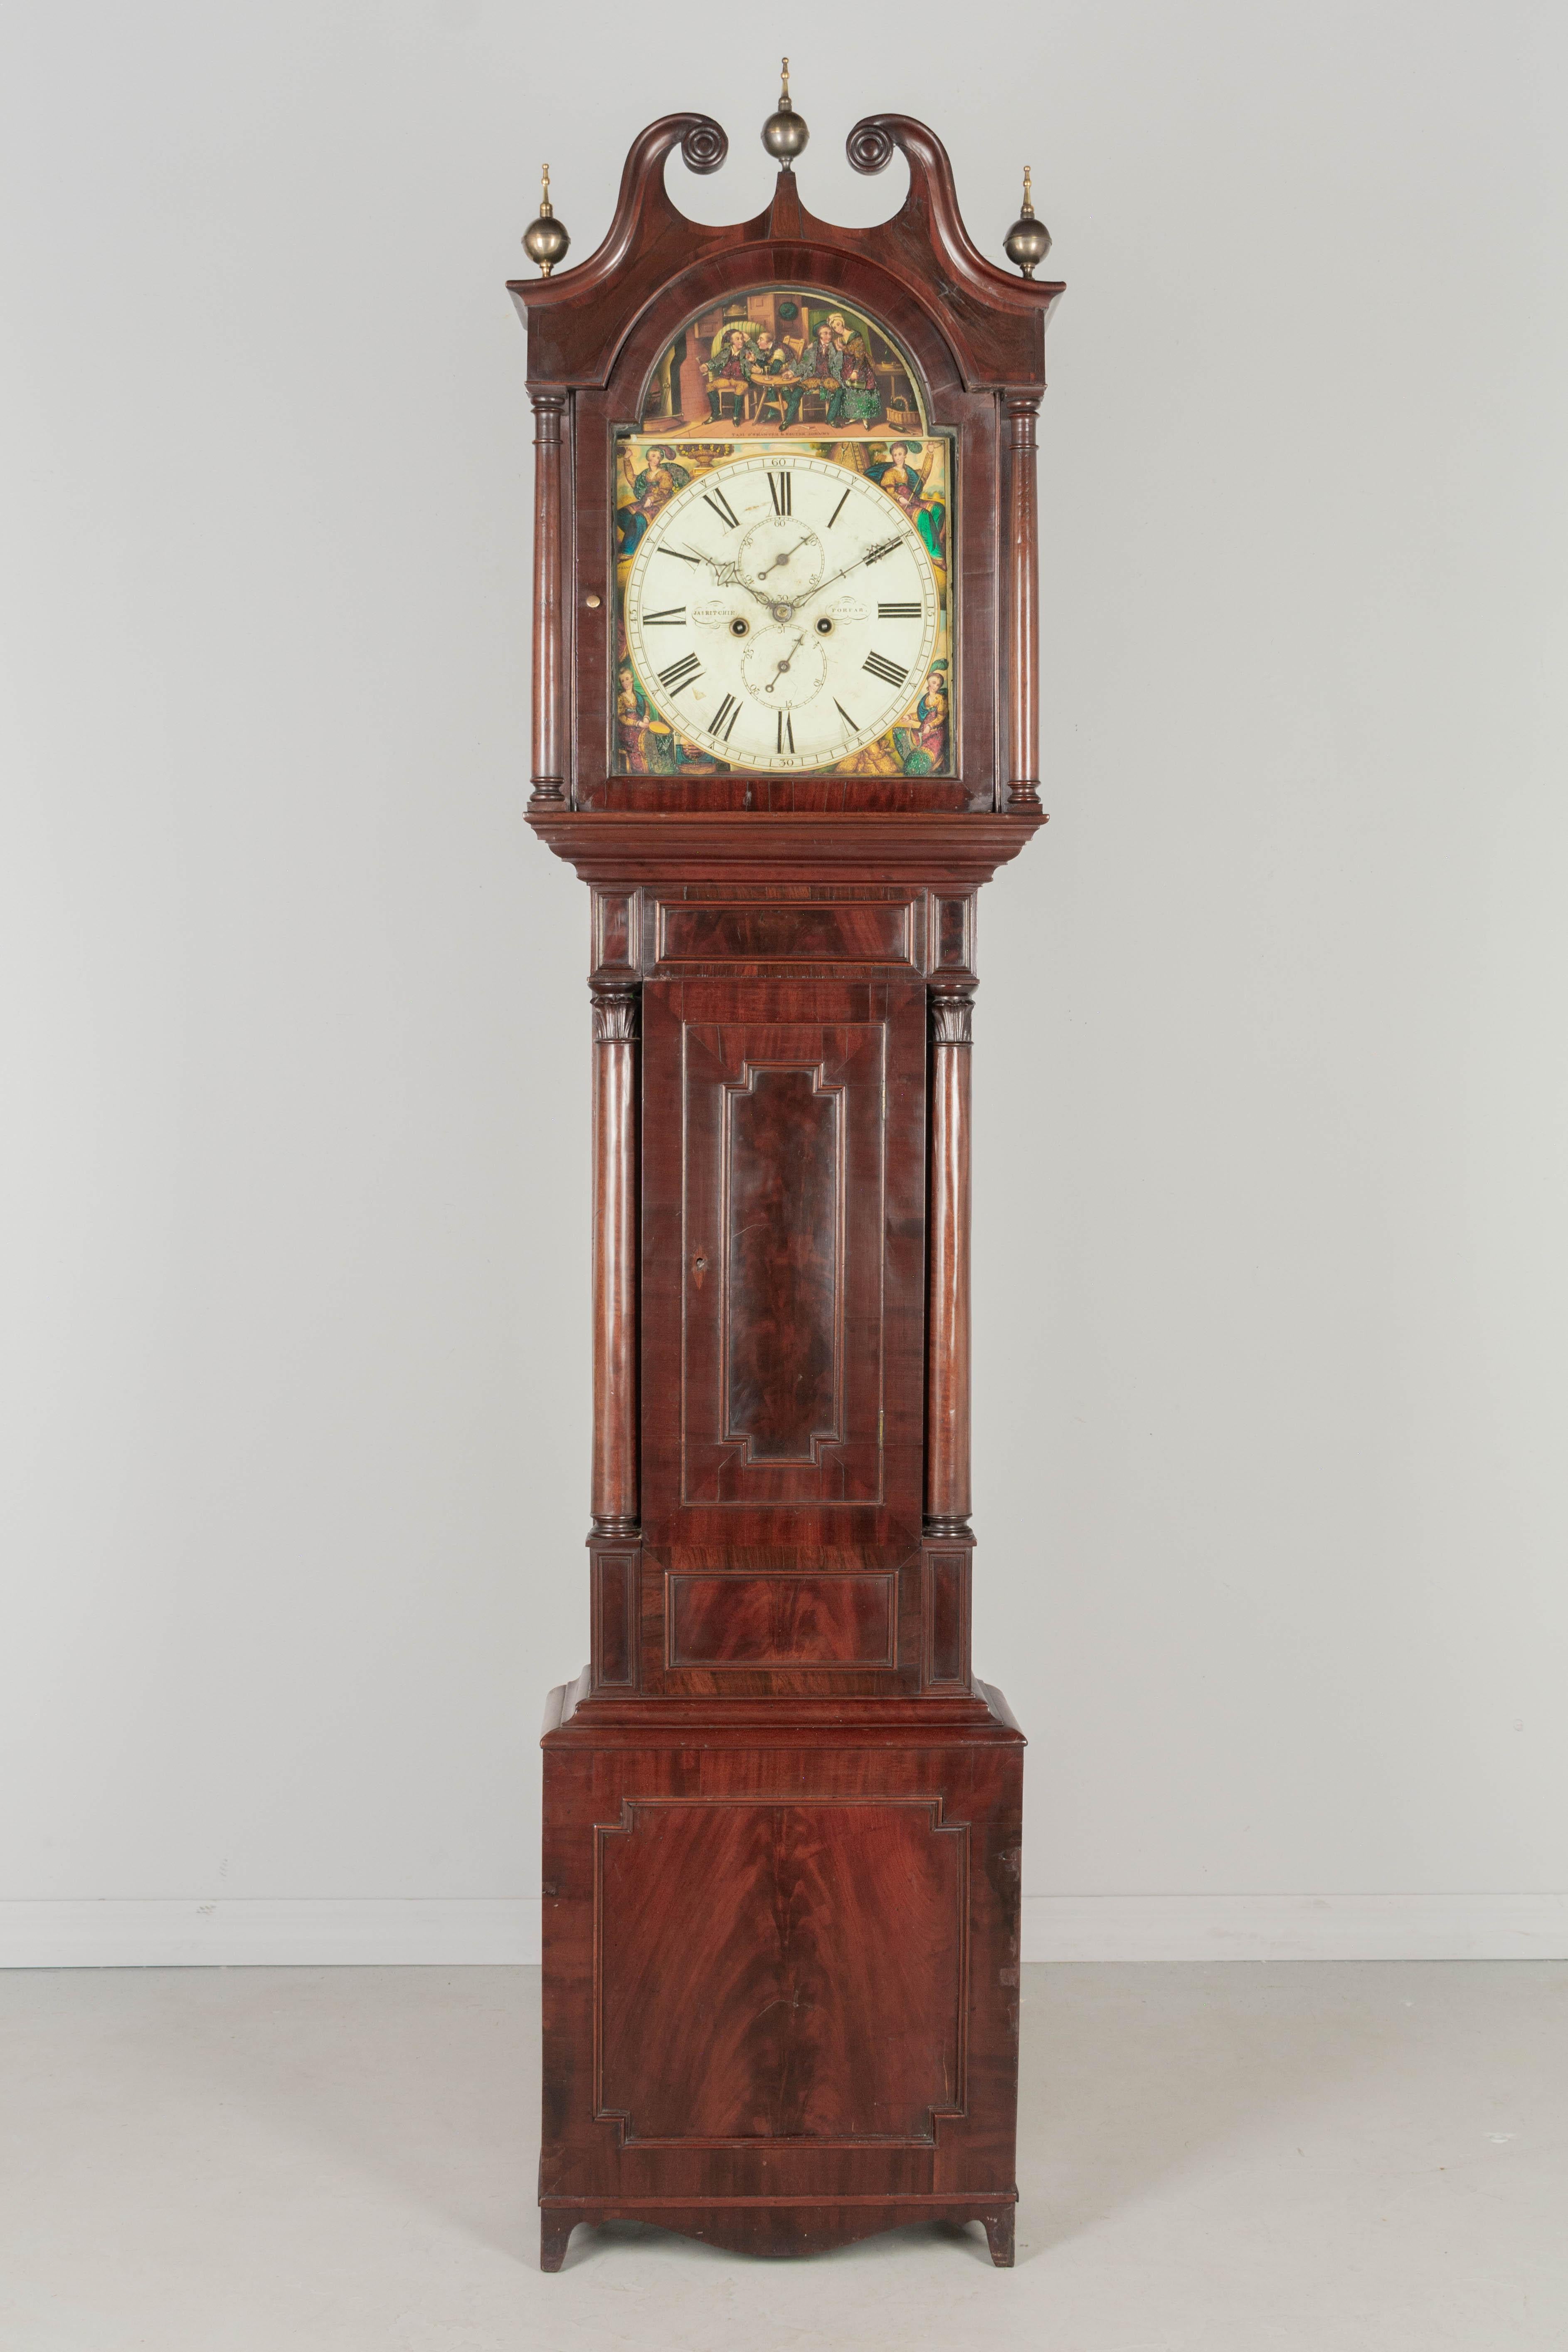 A 19th century English tall case clock crafted of beautiful figured and crotch, bookmatched mahogany with turned columns flanking dial case and door. Decorative brass ball finials on carved split-pediment top. Colorful painted surround illustrates a